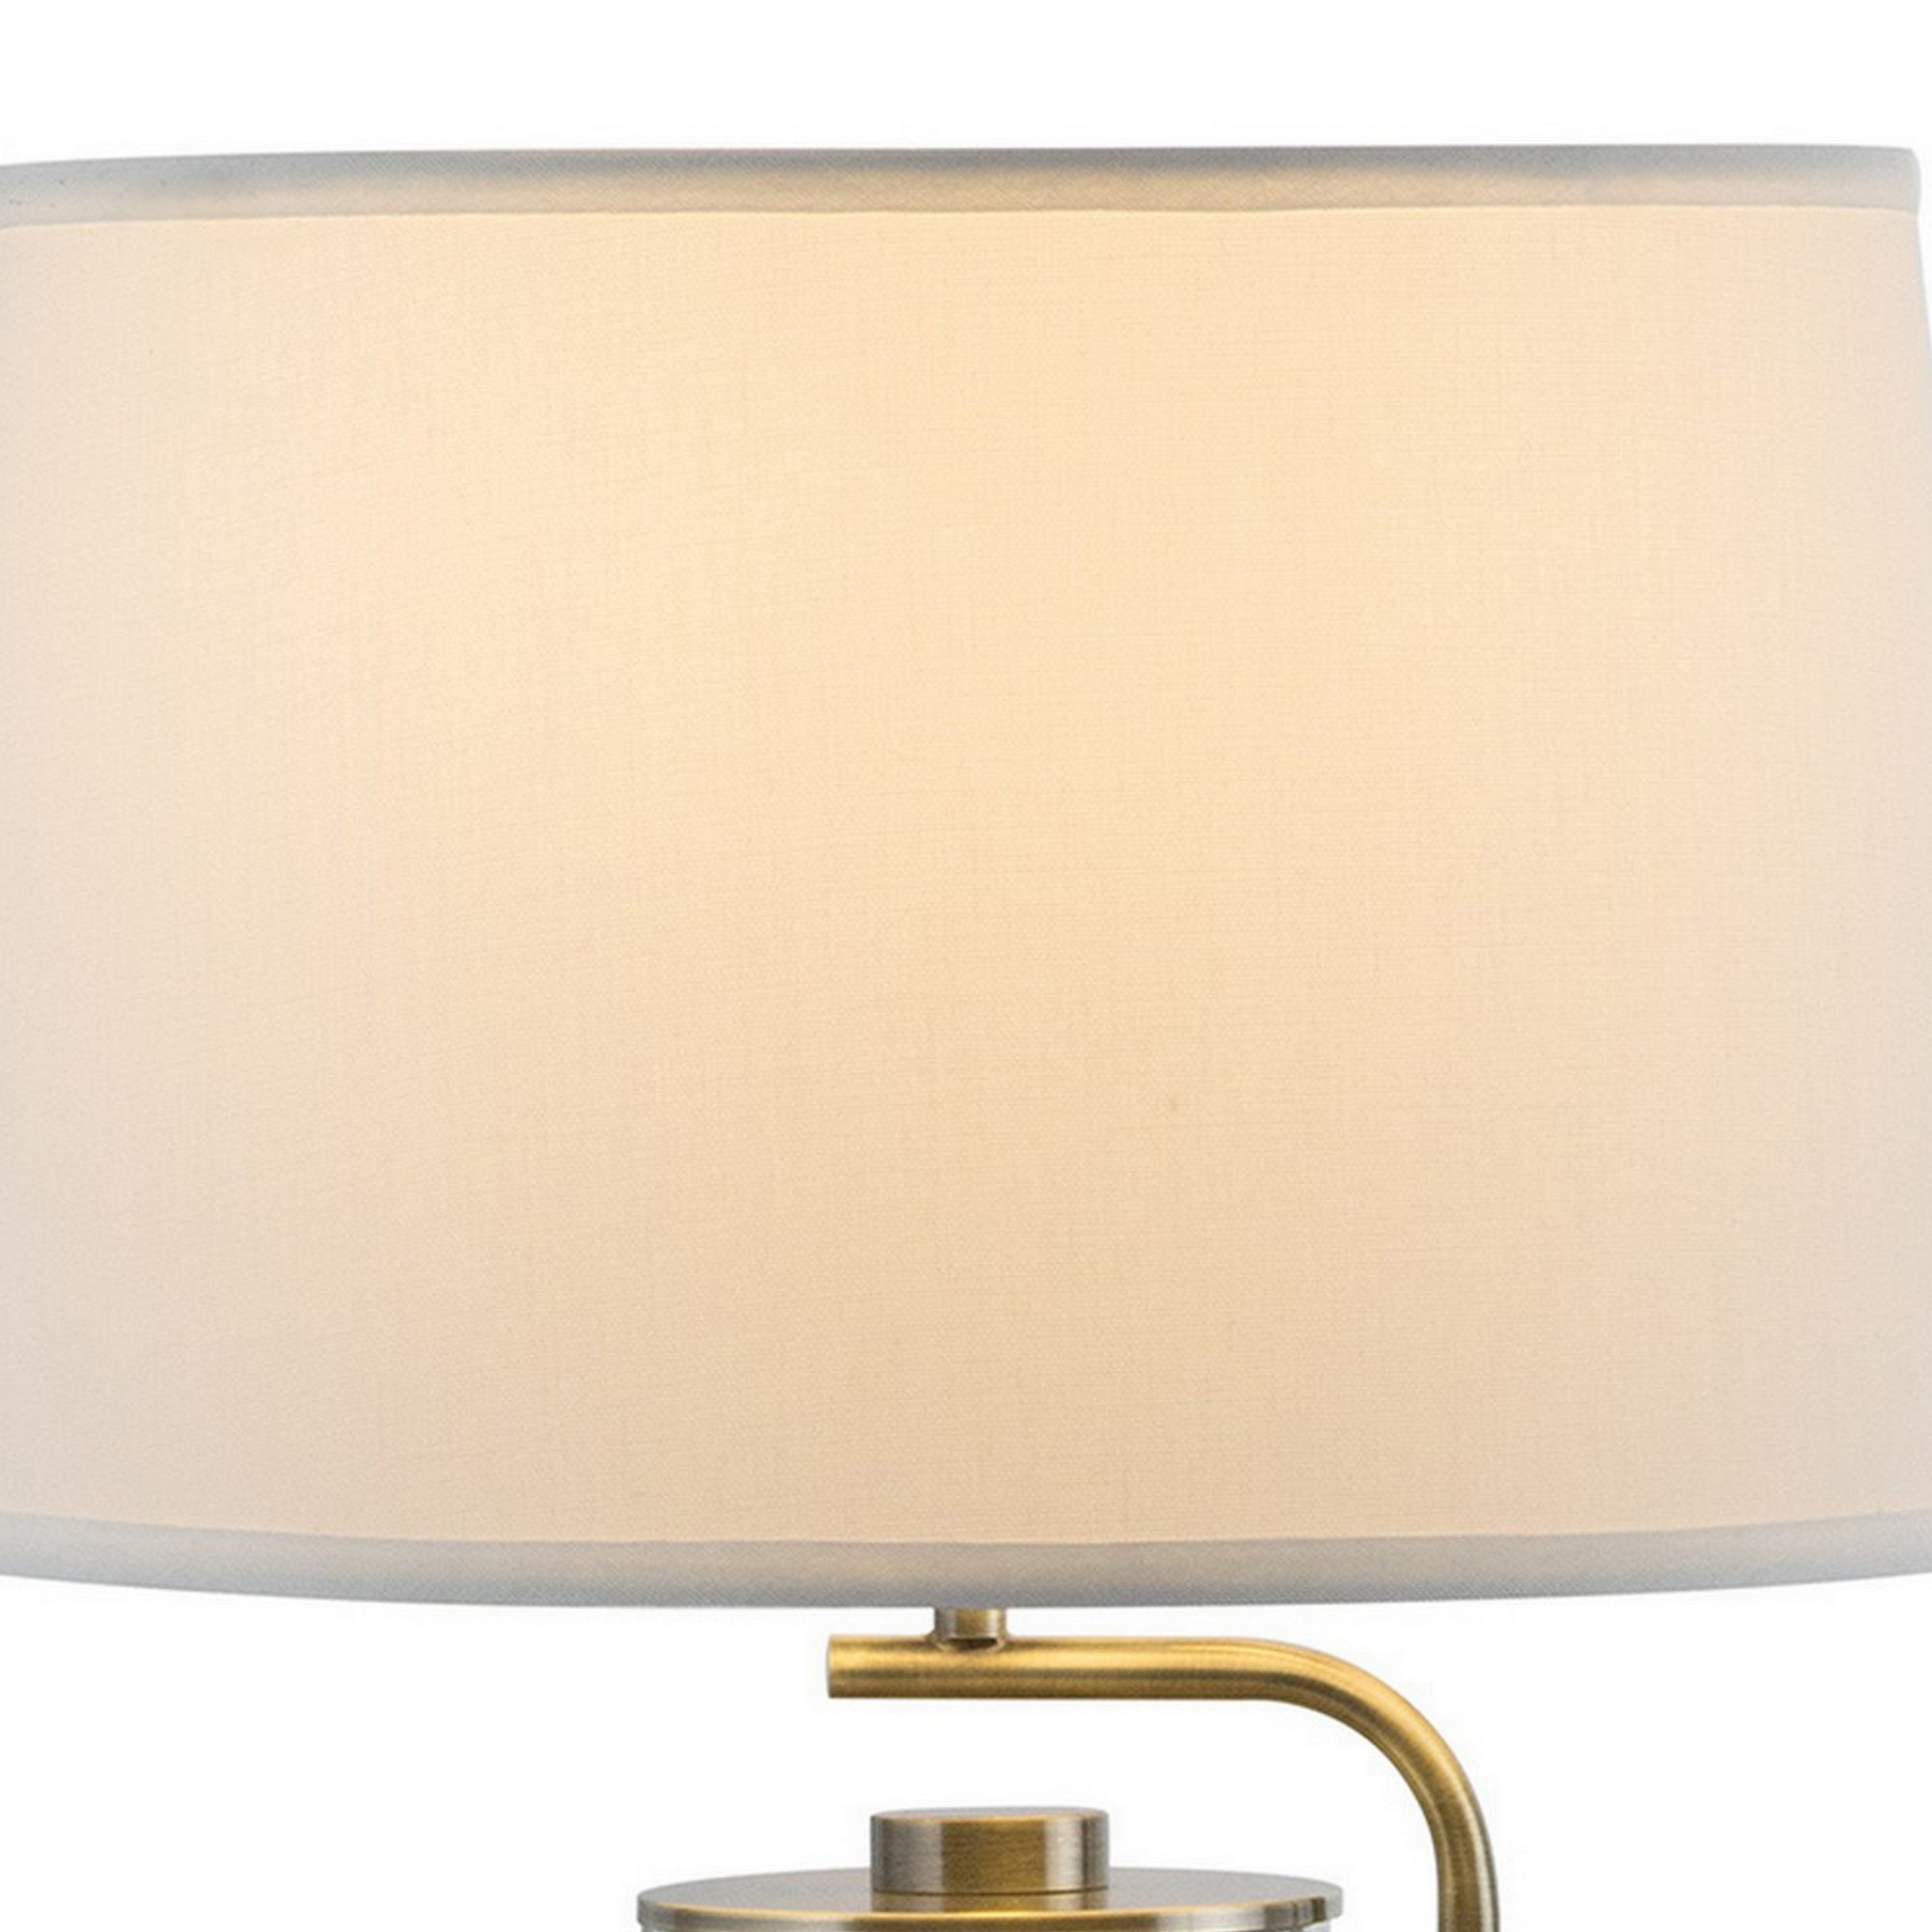 29 Inch Table Lamp With LED Night Light Stand, Glass, Antique Brass -Saltoro Sherpi